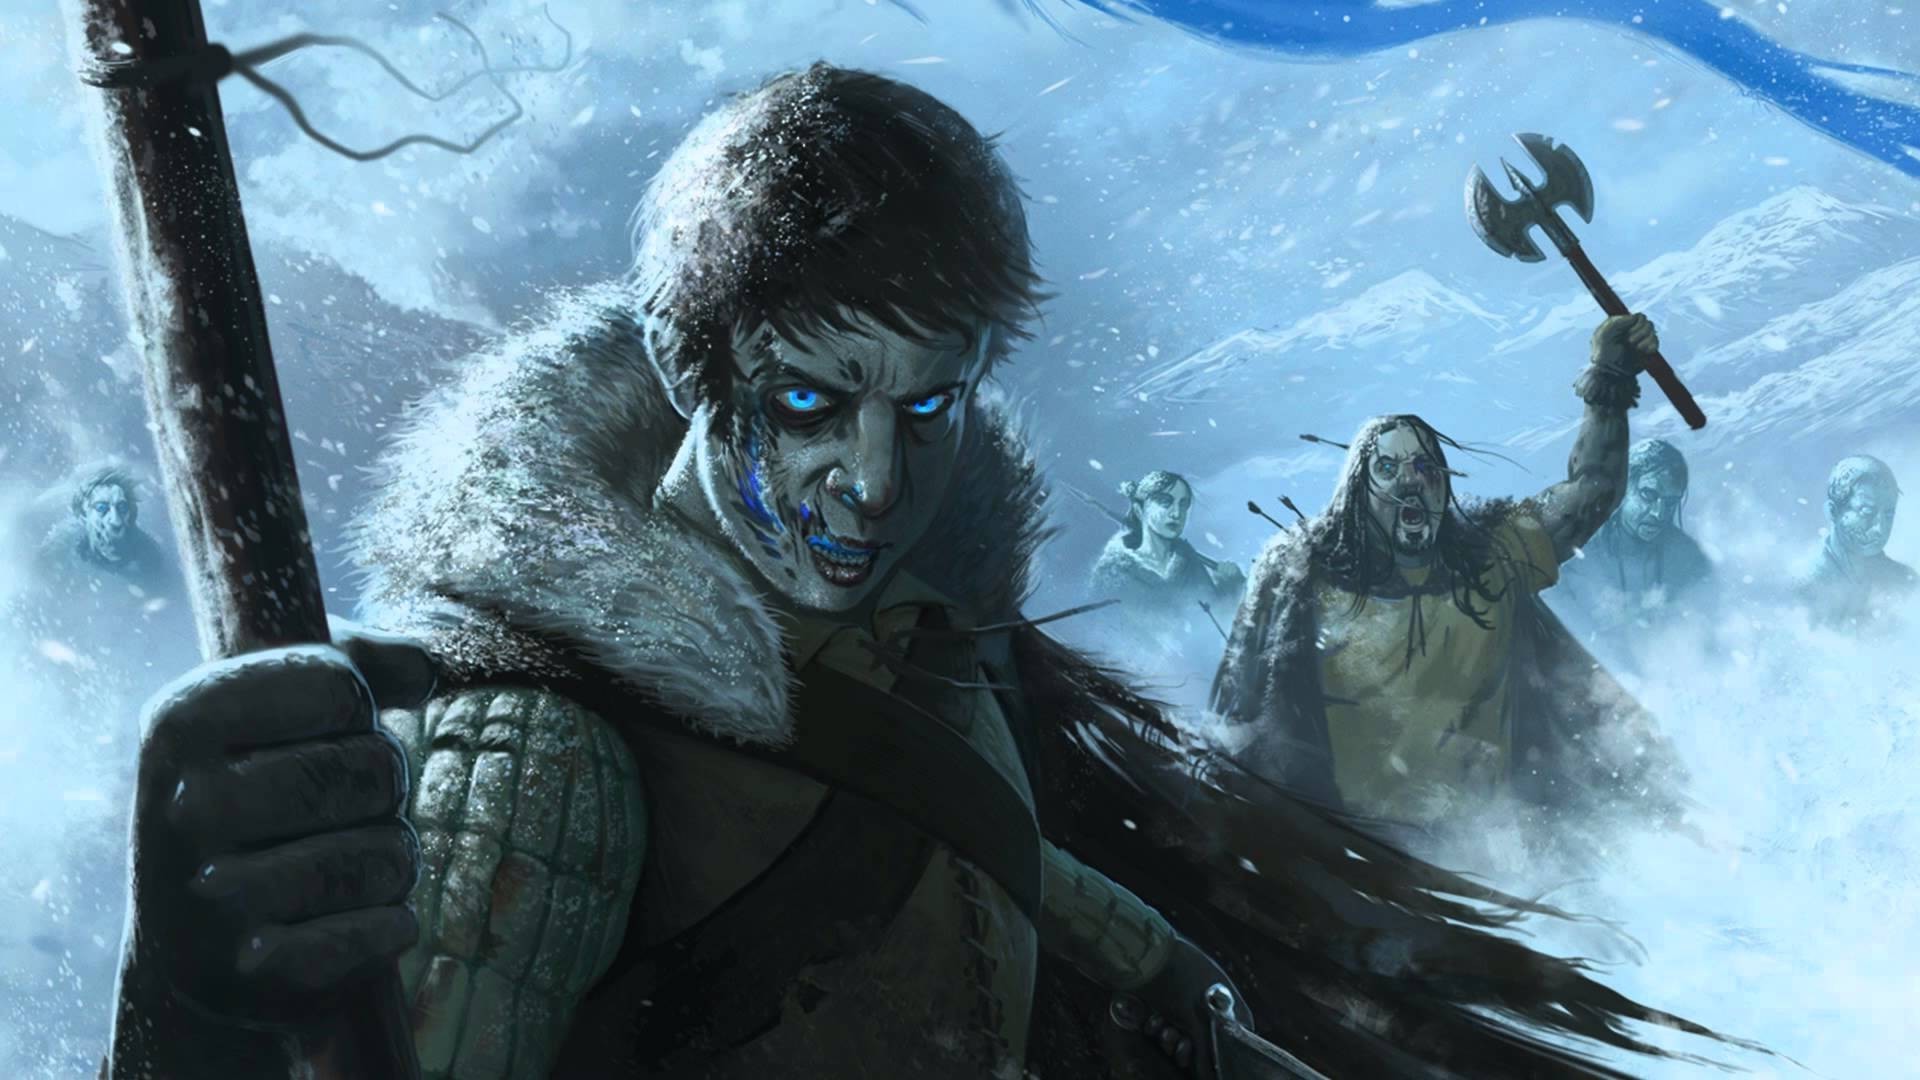 1920x1080 Game Of Thrones Song Of Ice And Fire Drawing White Walkers Zombies Snow  Wintergame Of Thrones Song Of Ice And Fire Drawing White Walkers Zombies  Snow Winter ...